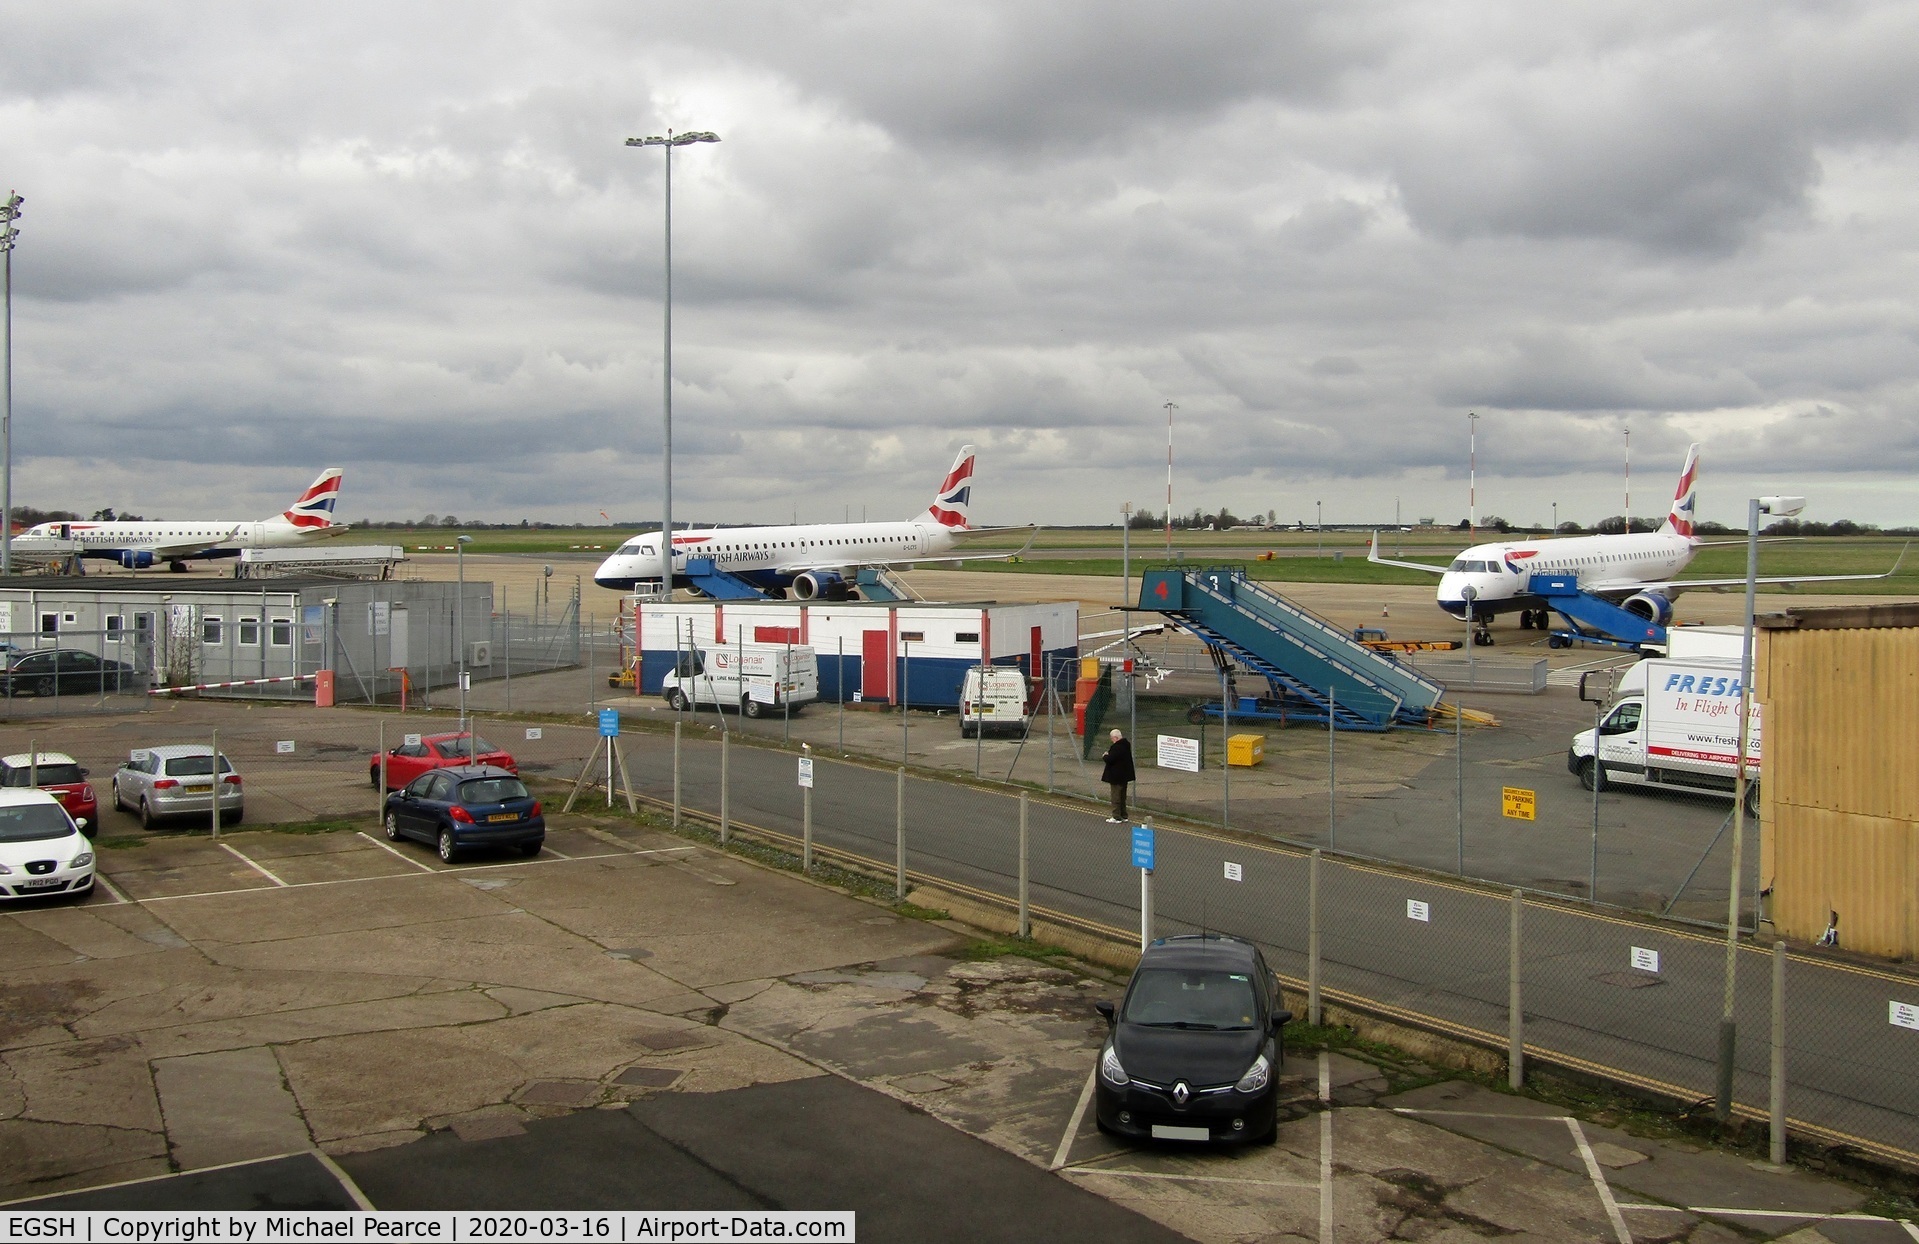 Norwich International Airport, Norwich, England United Kingdom (EGSH) - G-LCYG, G-LCYS and G-LCYT parked on Stands 3, 5 and 6 respectively for storage, due to a drop in passenger demand during the COVID-19 outbreak.